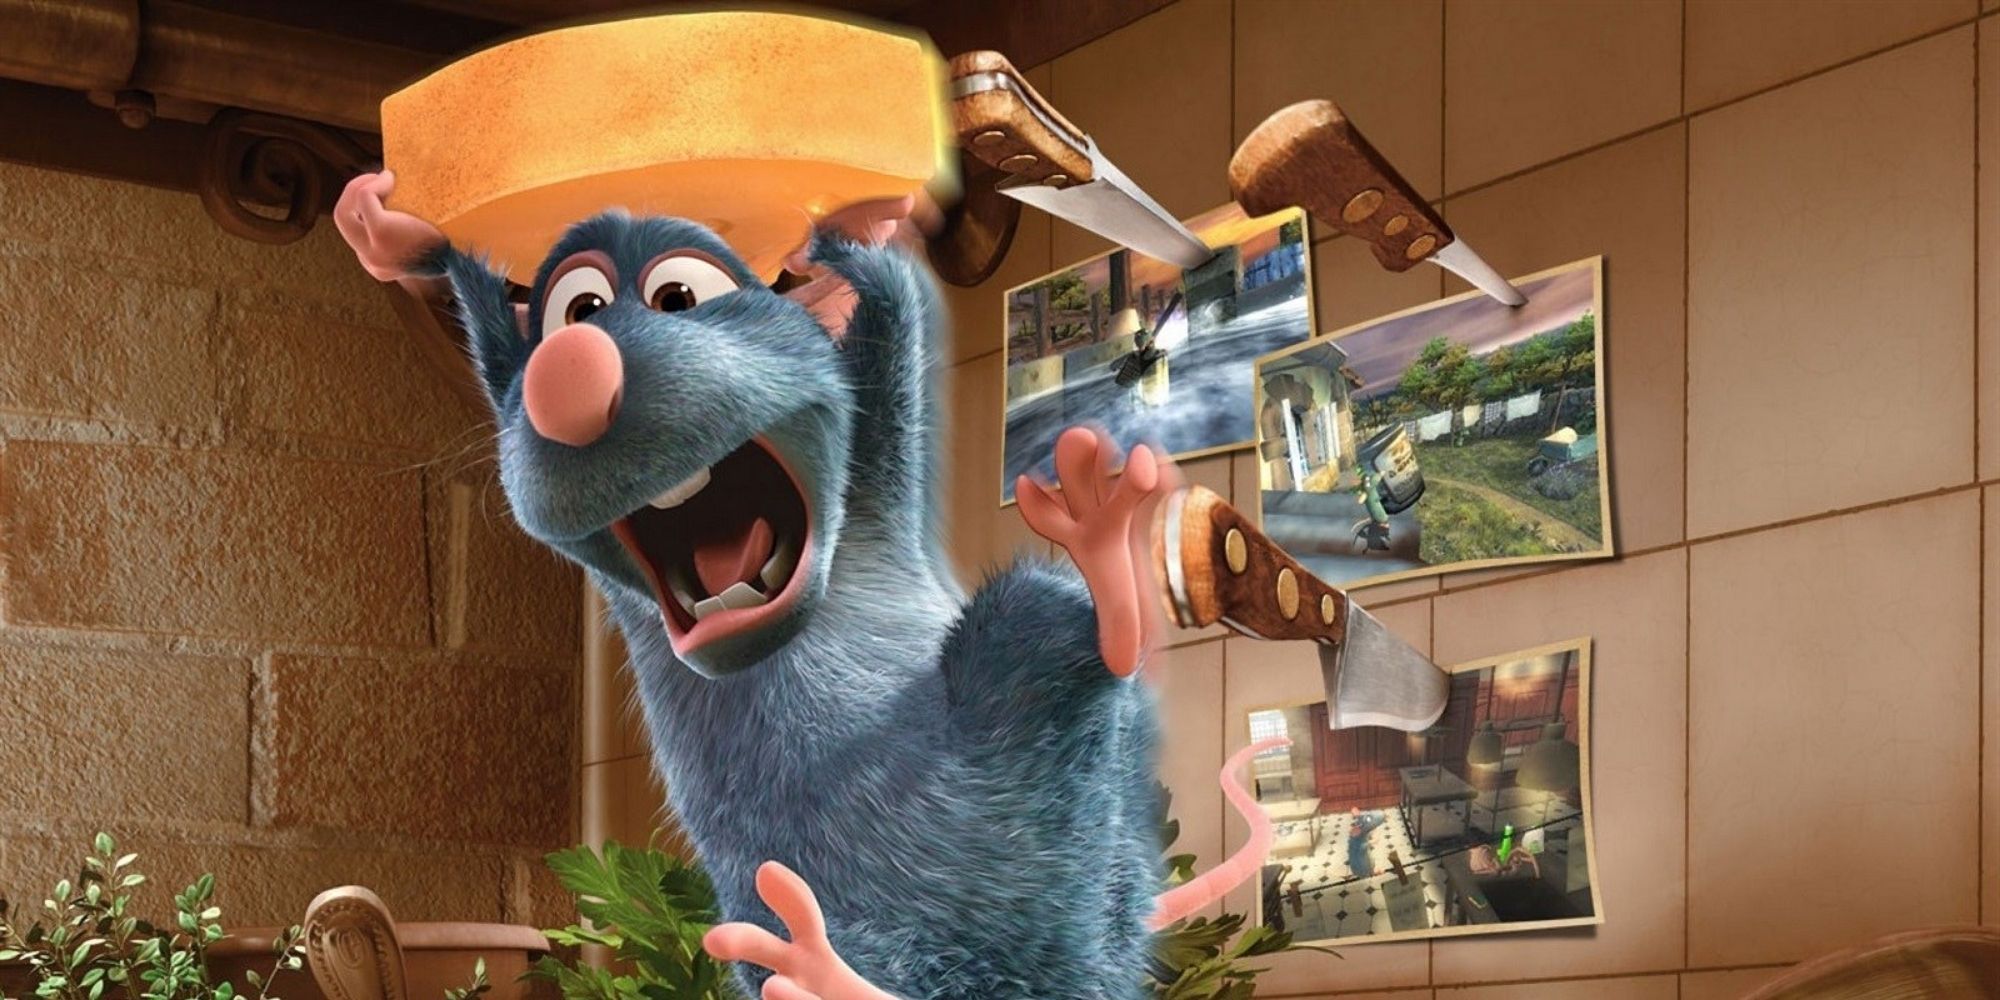 Ratatouille Remmy holding a wheel of cheese while running away from knives that are stuck in the wall